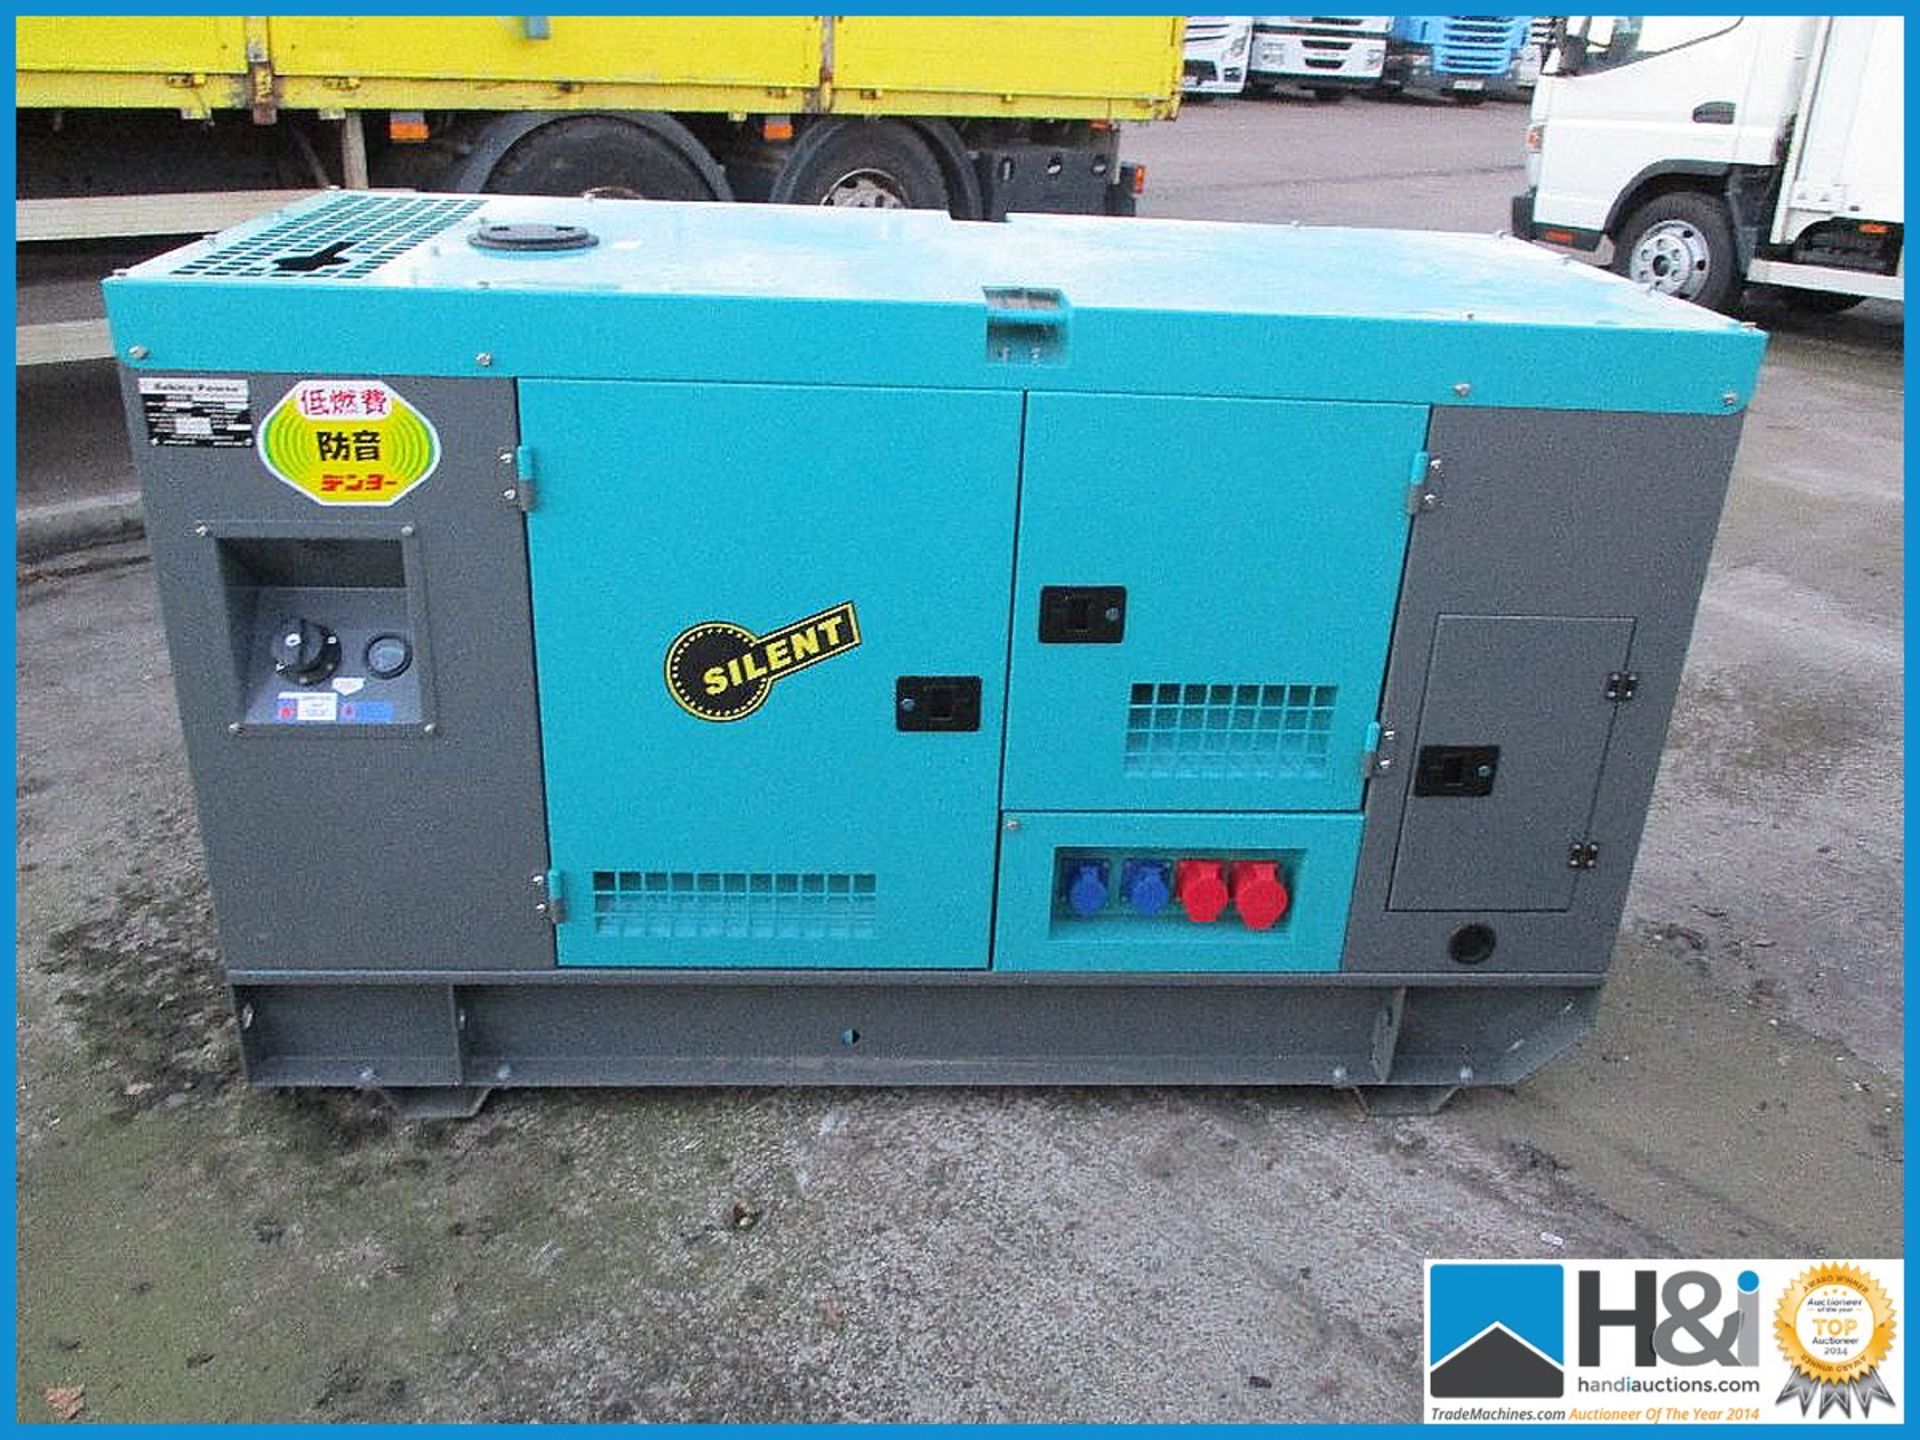 Brand new, unused Ashita AG3-40SBG 30KvA generator. No oil or water and ready for transportation.